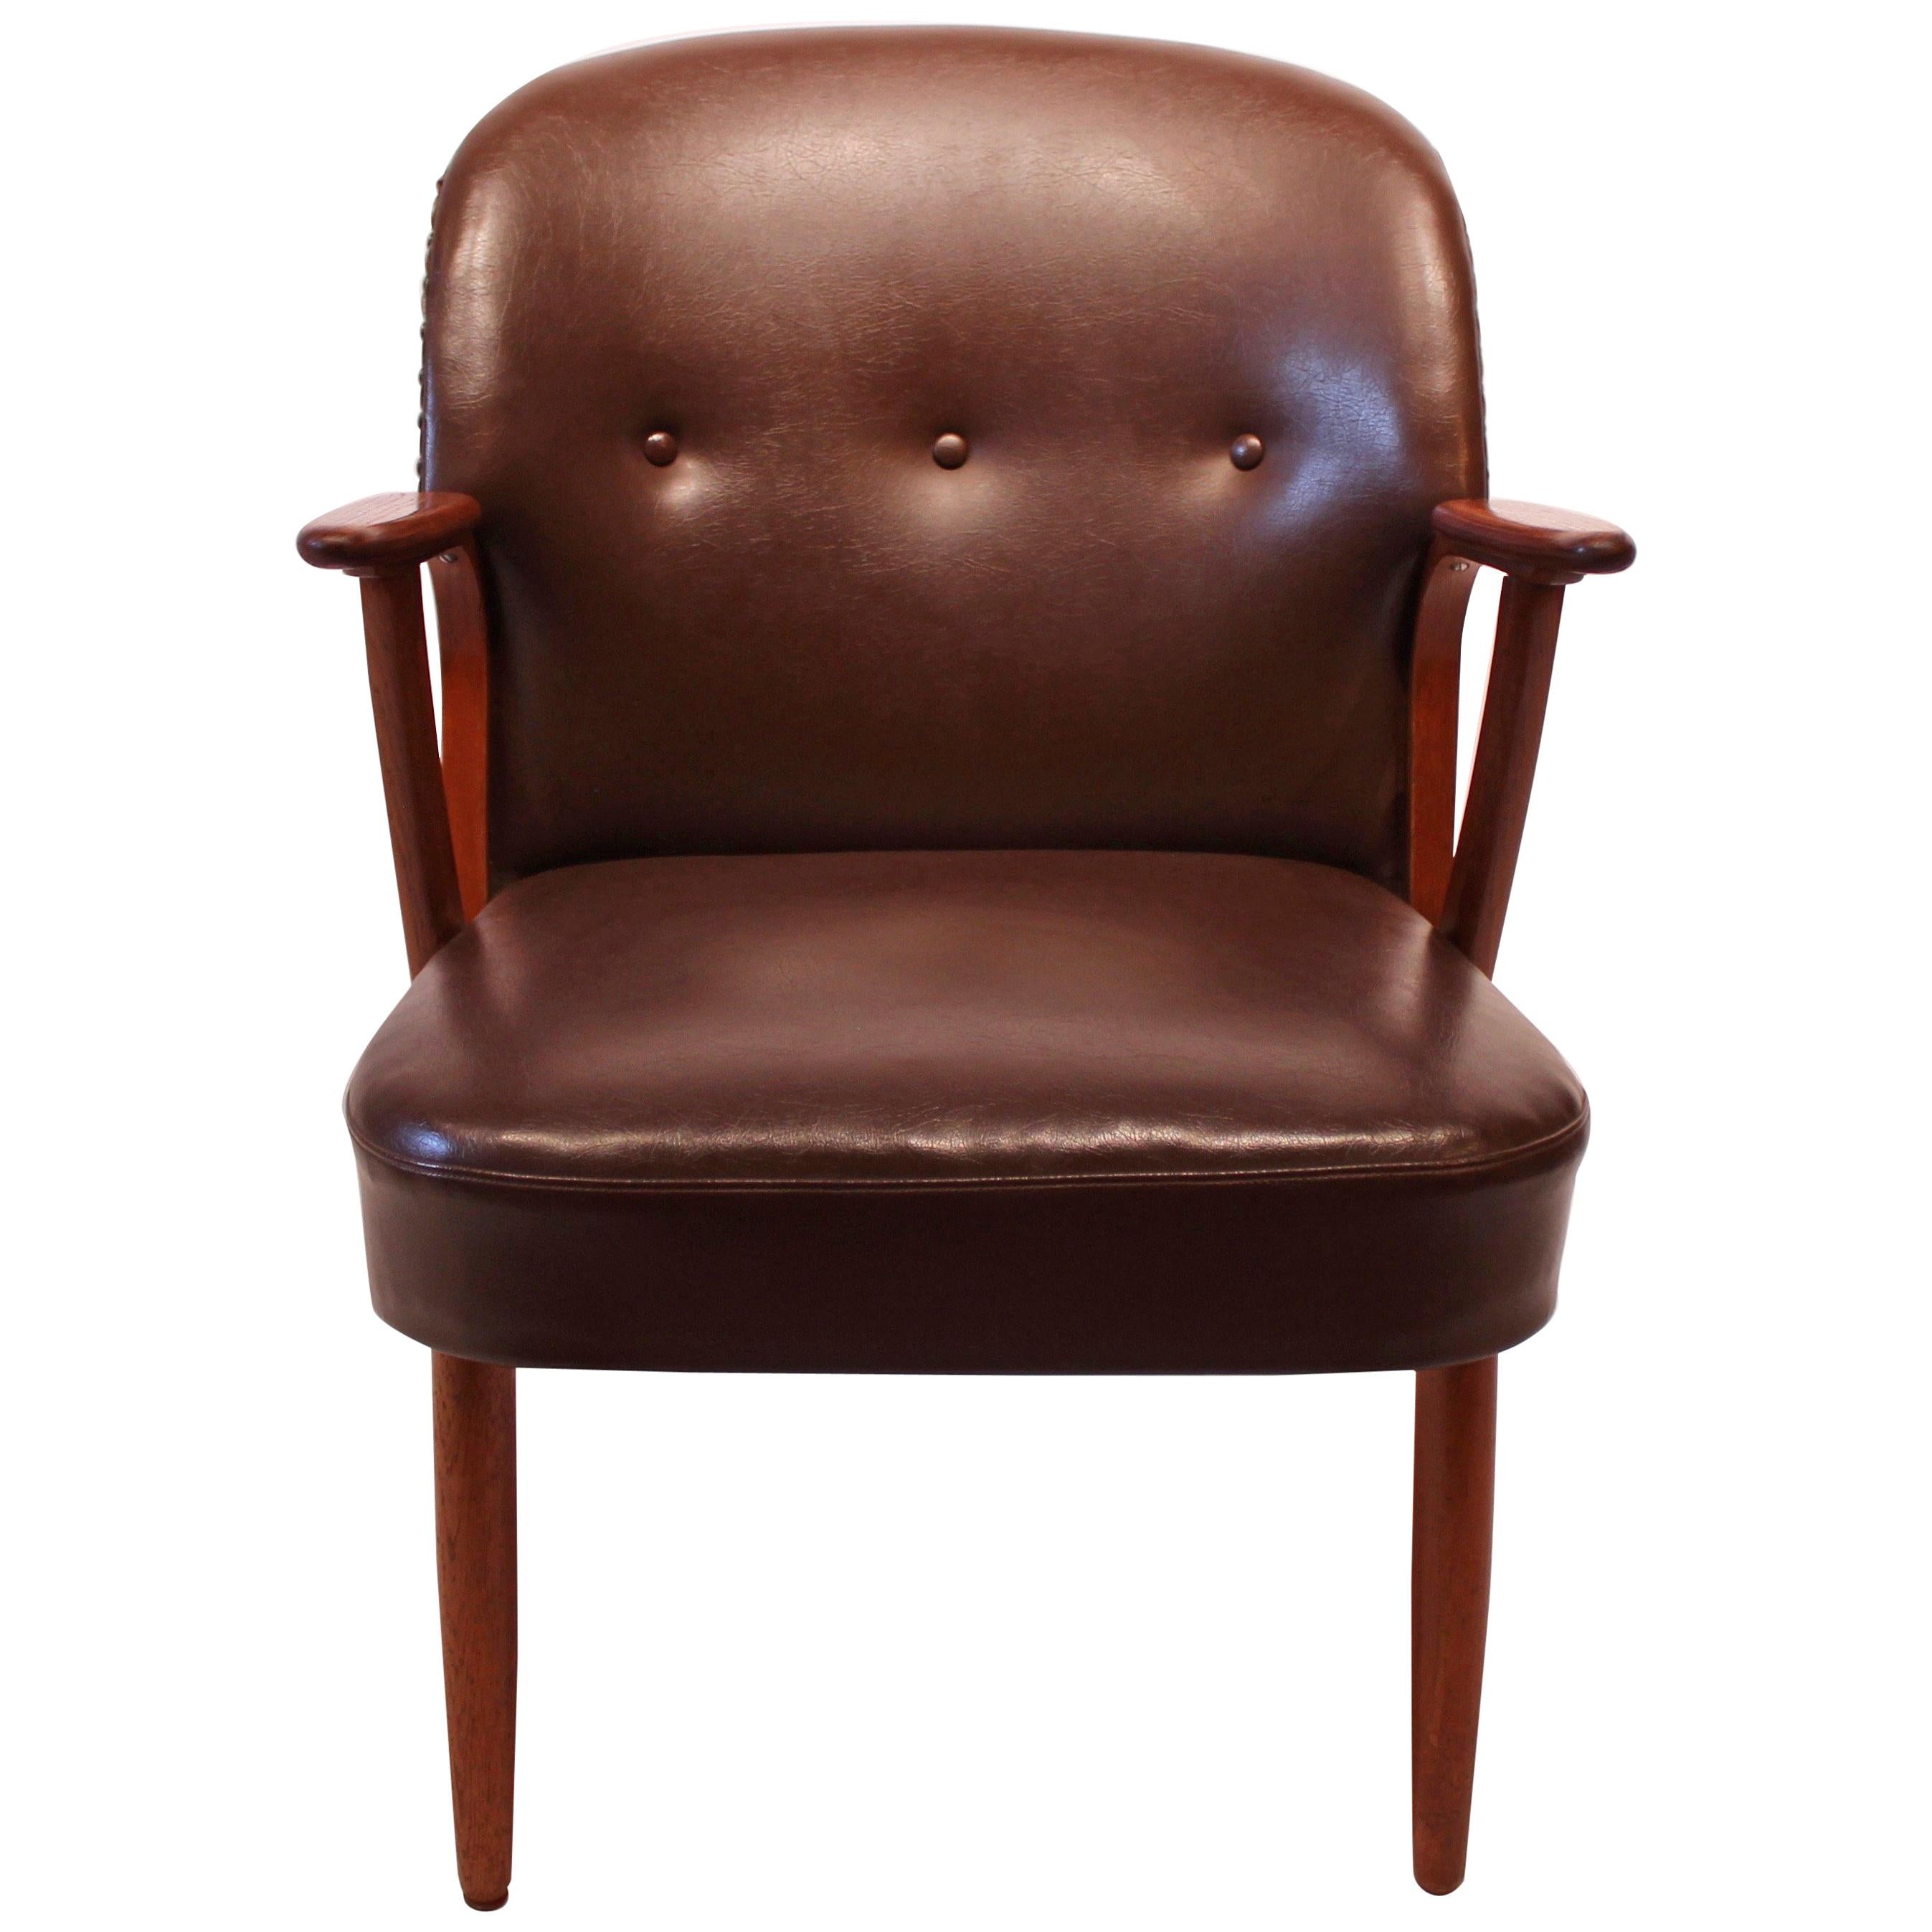 Easy Chair of Dark Brown Patinated Leather and Teak, Danish Design, 1940s